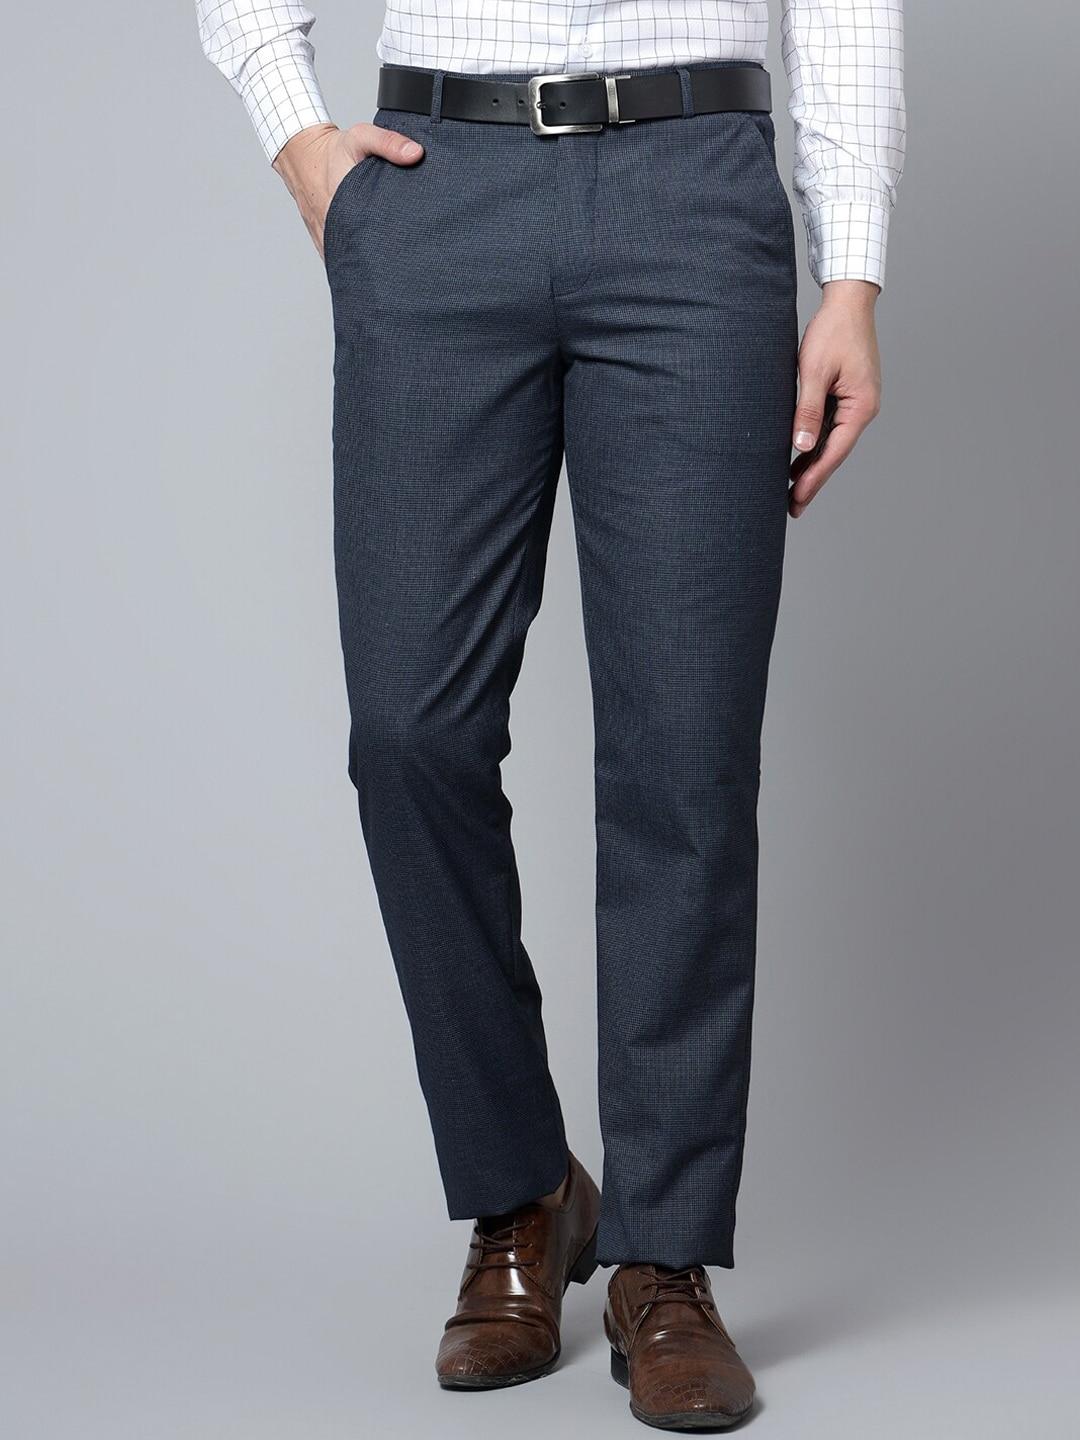 cantabil-men-mid-rise-formal-trousers